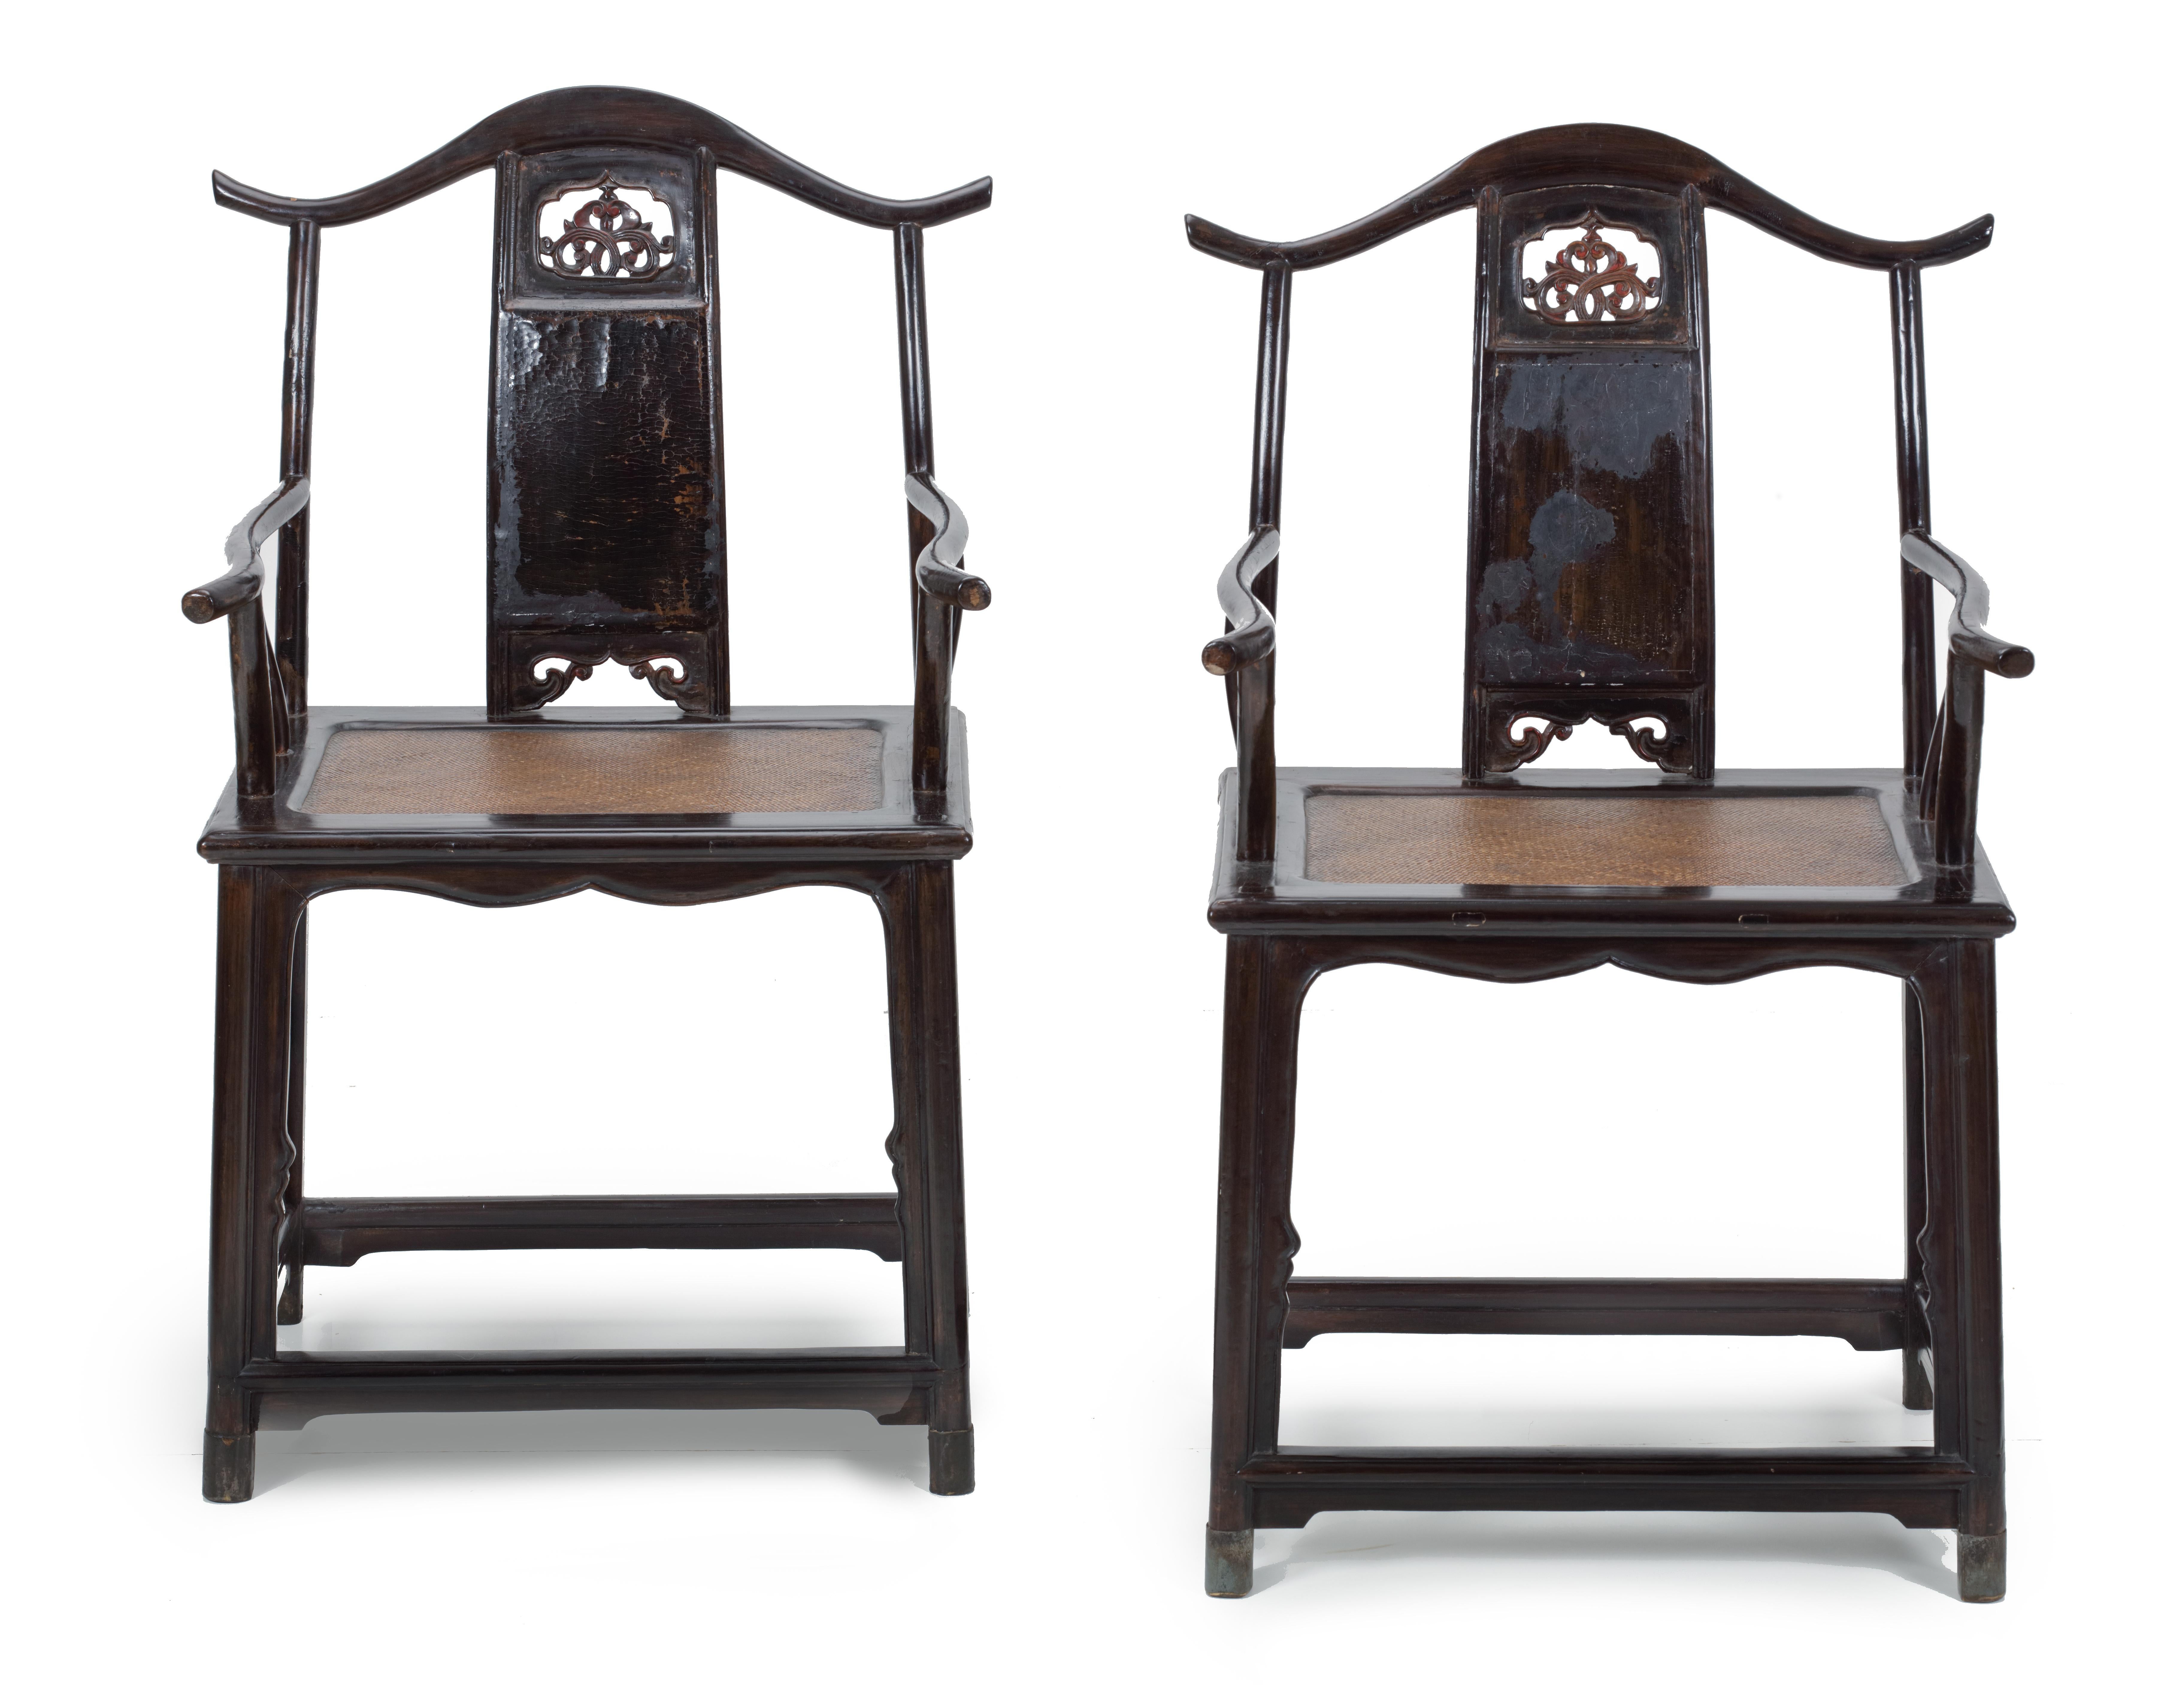 A pair of lacquered wood northern Chinese yoke-back chairs, Guan mao shi

Hebei Province, Qing Dynasty, early 18th century

Measures: H. 99.5 x W. 61 x D. 49 cm

?The back splats of the chairs, with rattan seating, are decorated with floral